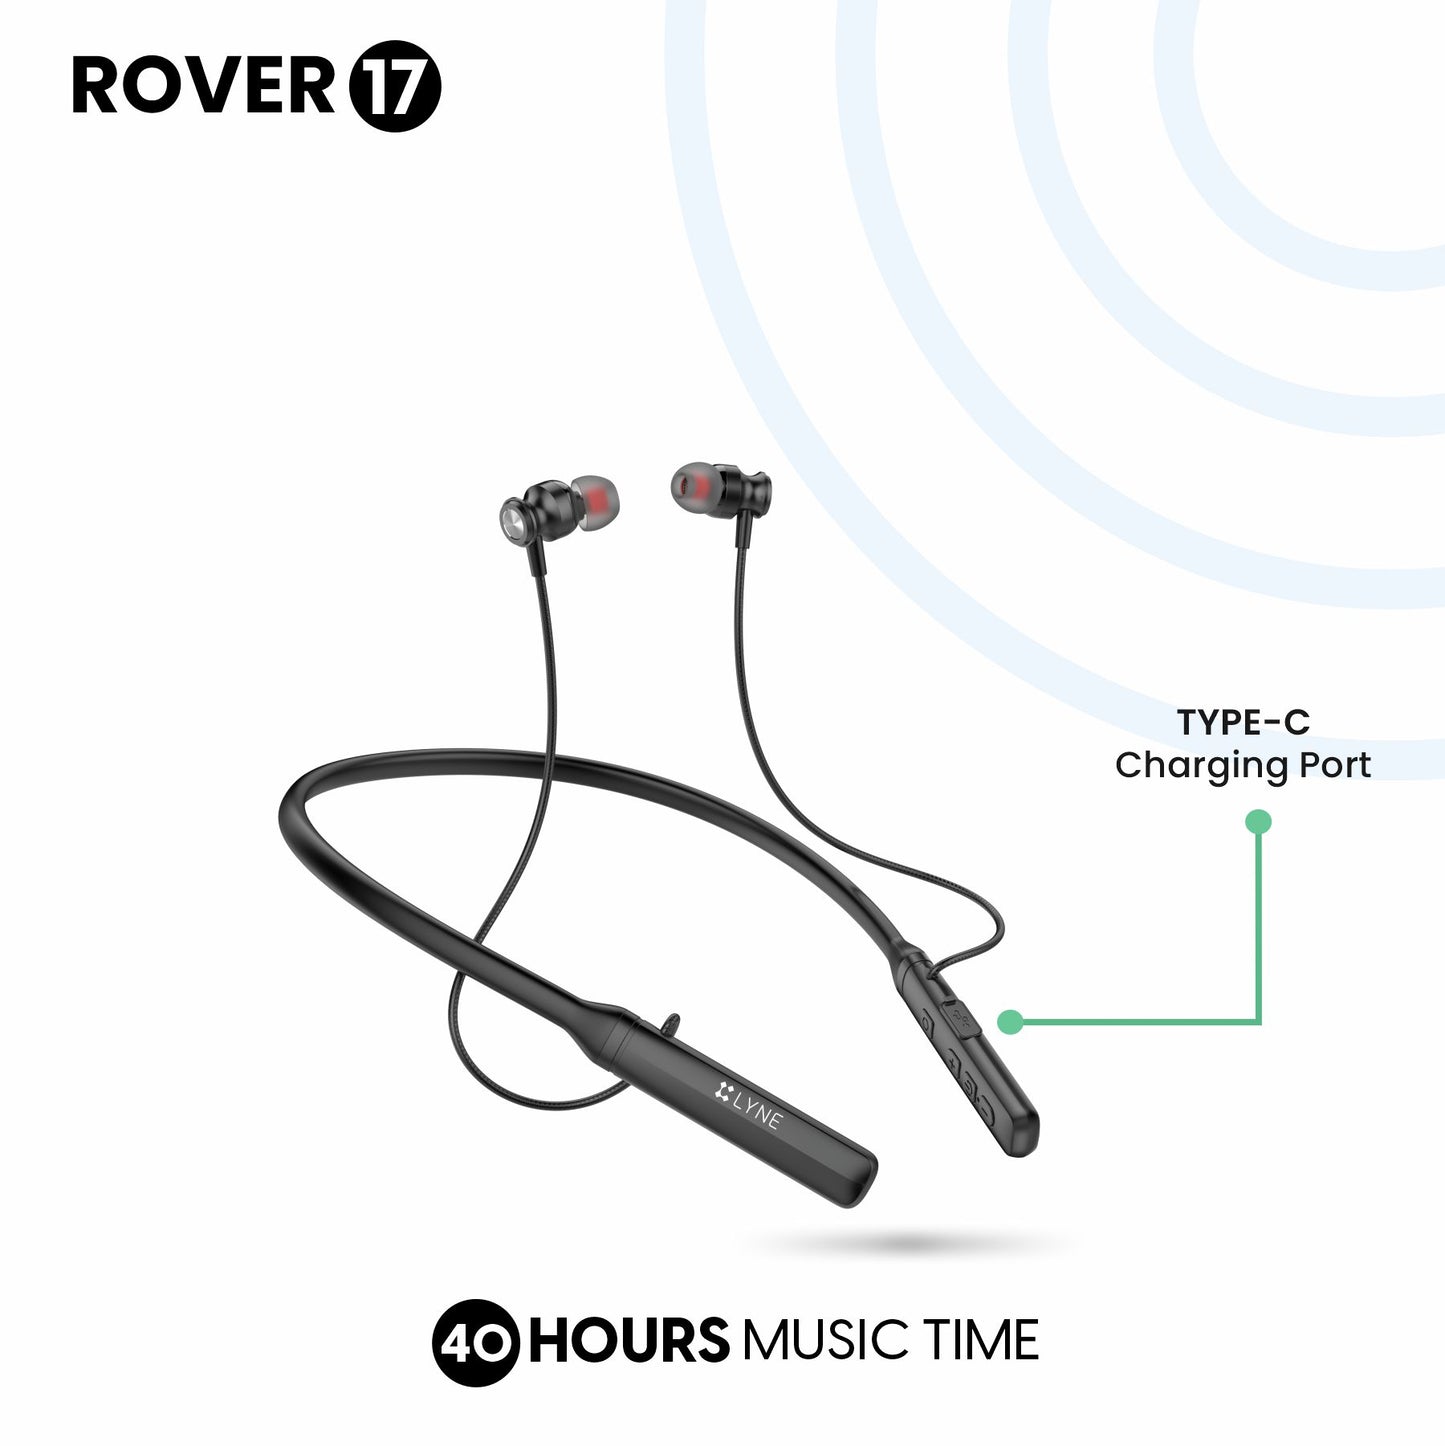 LYNE Rover 17 40 Hours Music Time Wireless Neckband with IPX4 Water Resistance, Magnetic Earbuds & Mic